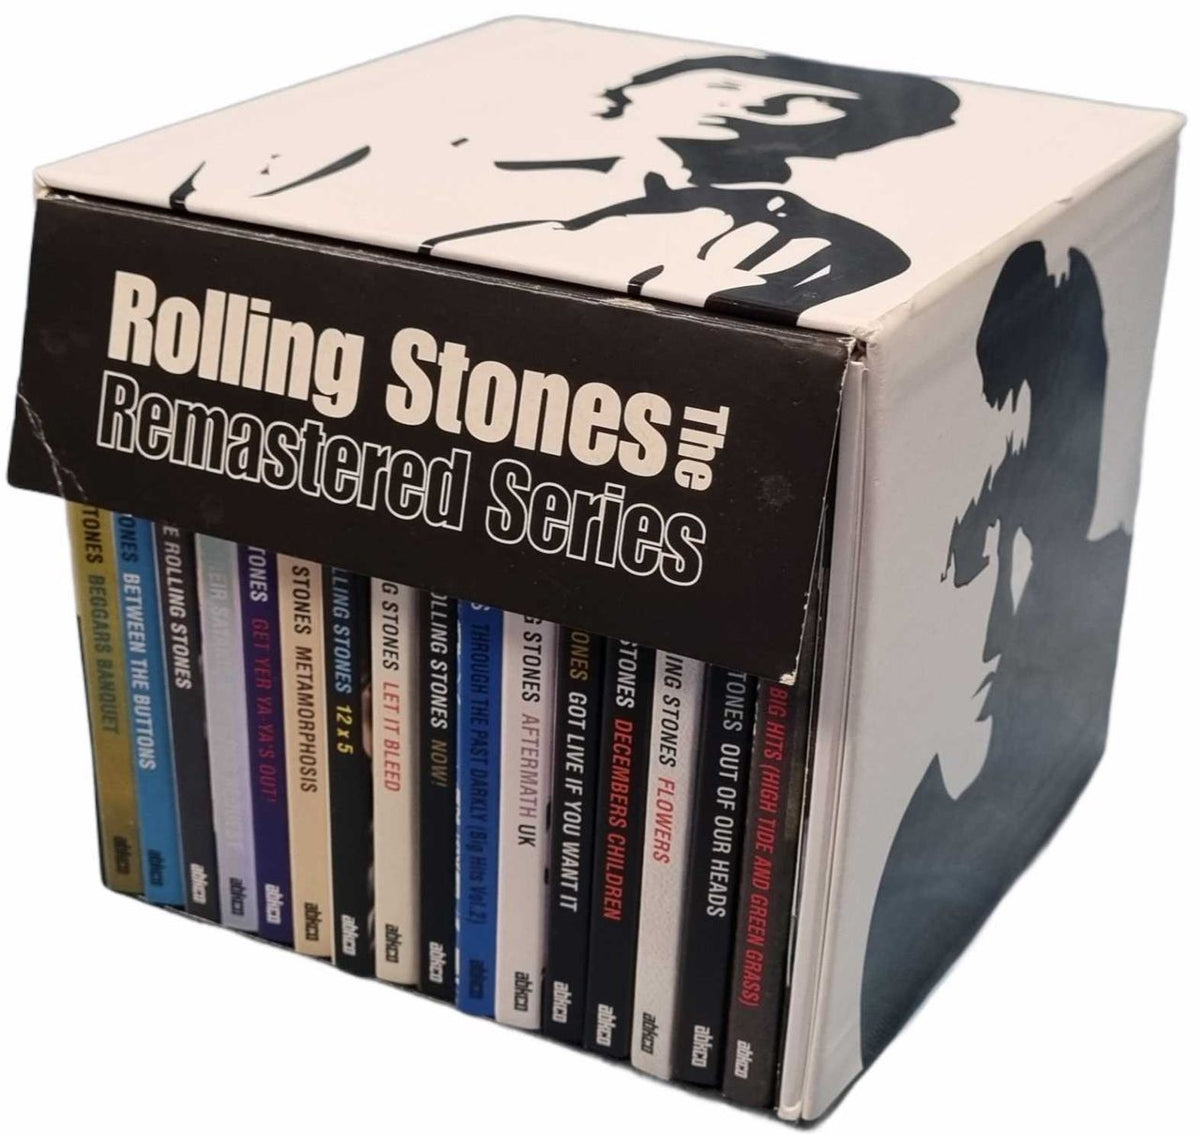 The Rolling Stones Remastered Series - Complete UK Cd album box ...